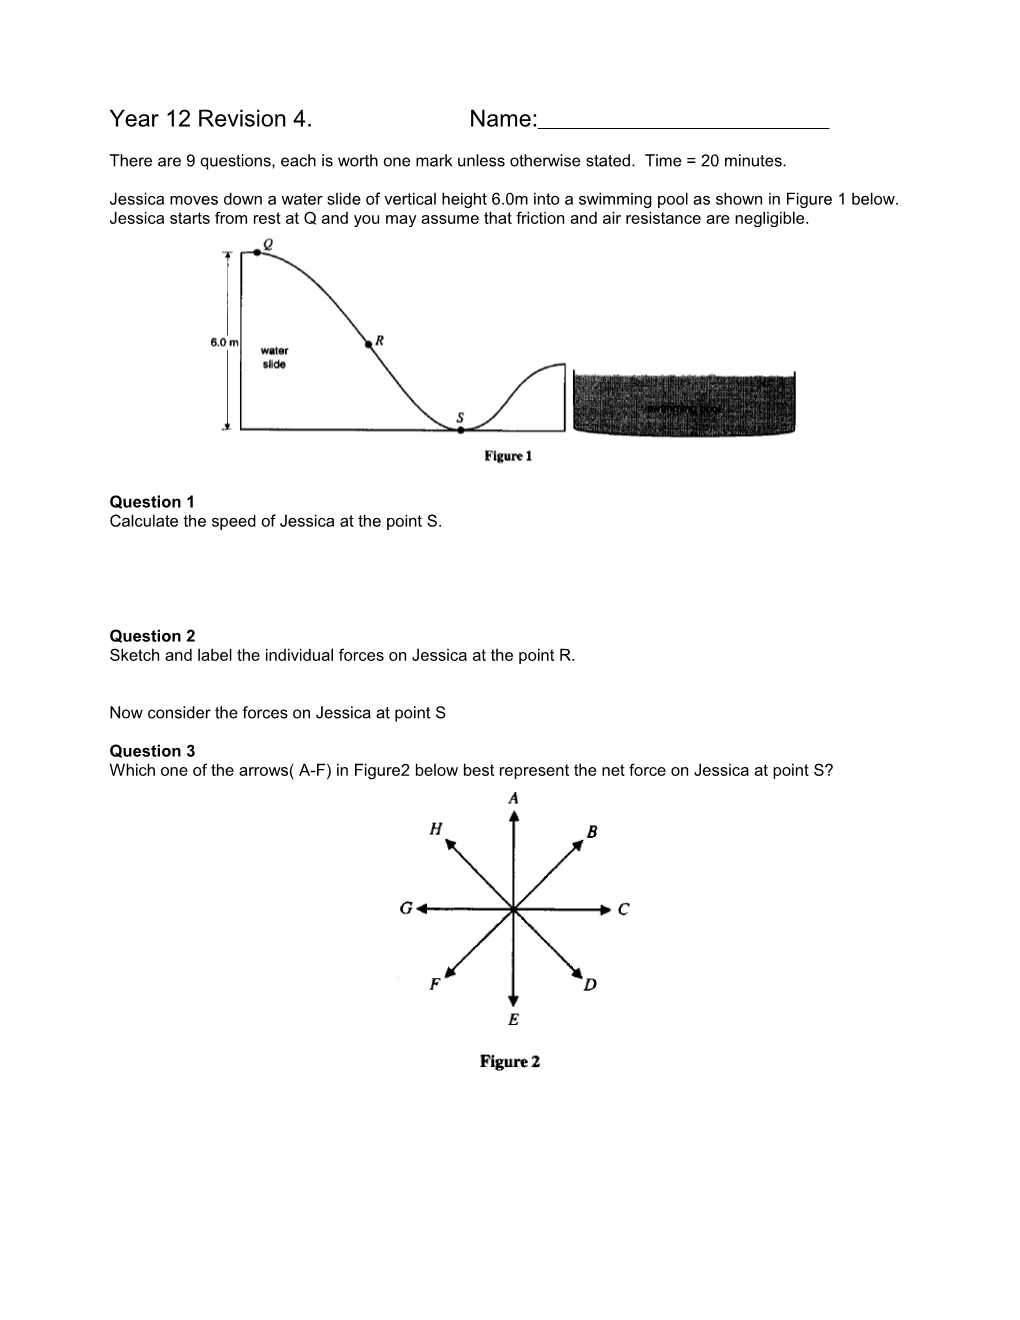 Year 12 Revision Test 3